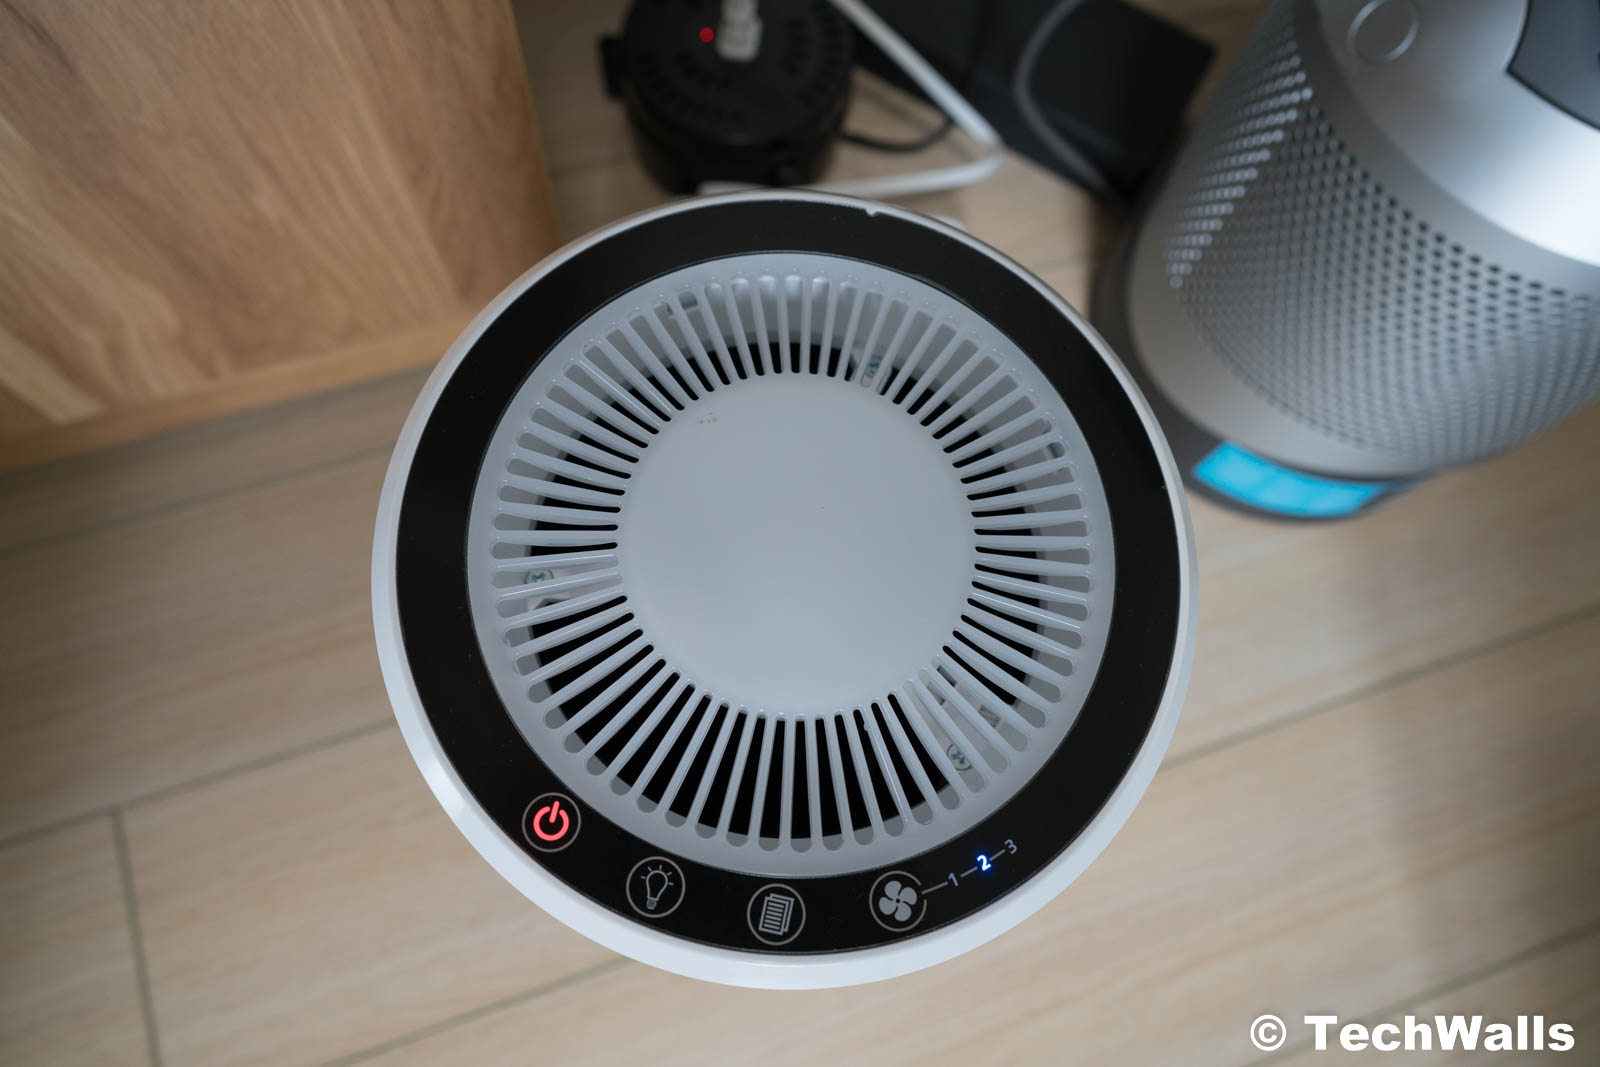 LEVOIT LV-H132 Air Purifier with True Hepa Filter - Unboxing & Testing 